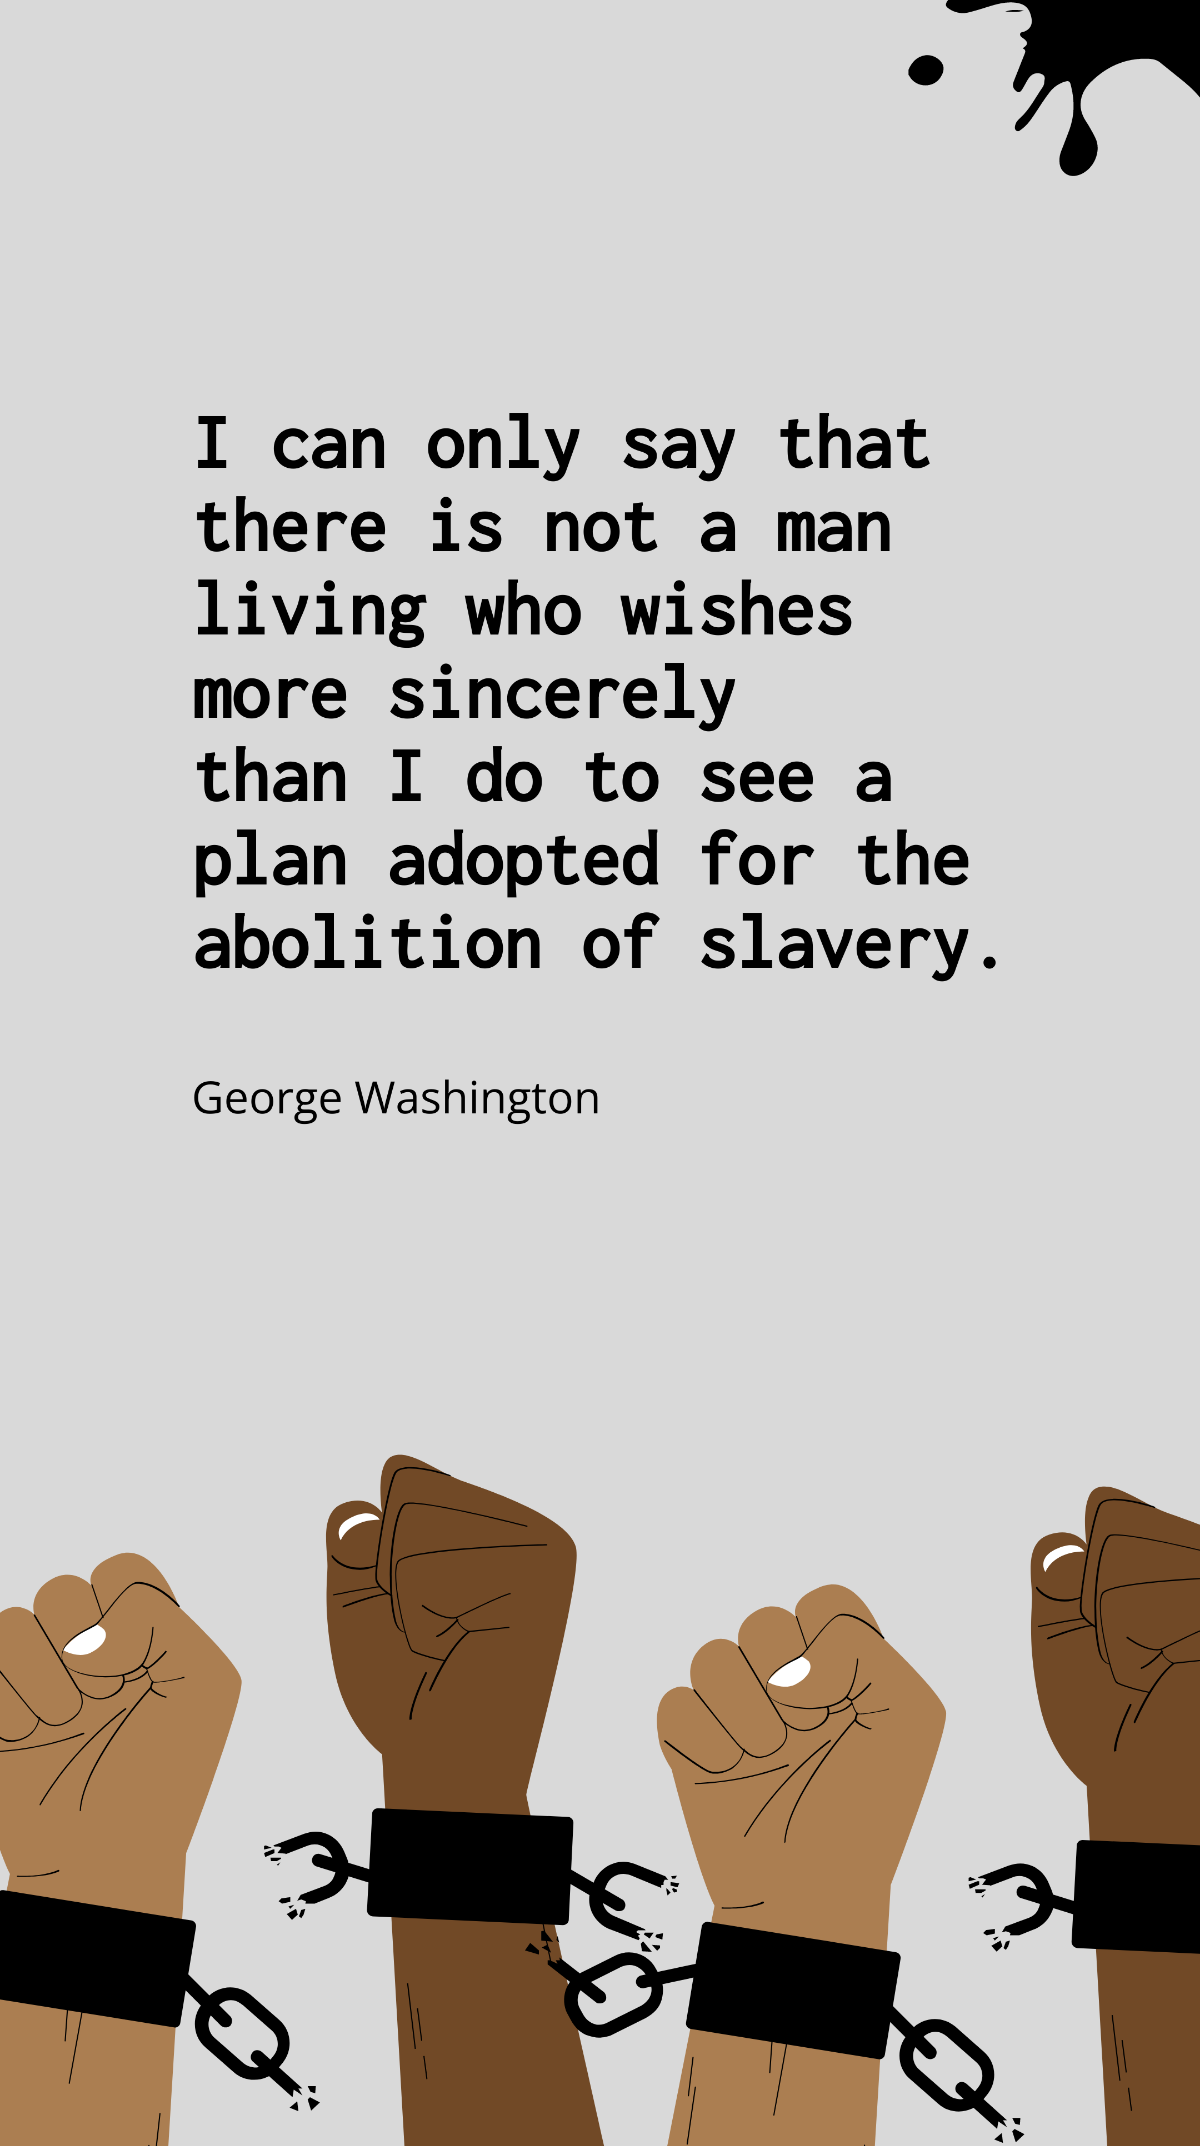 George Washington - I can only say that there is not a man living who wishes more sincerely than I do to see a plan adopted for the abolition of slavery.